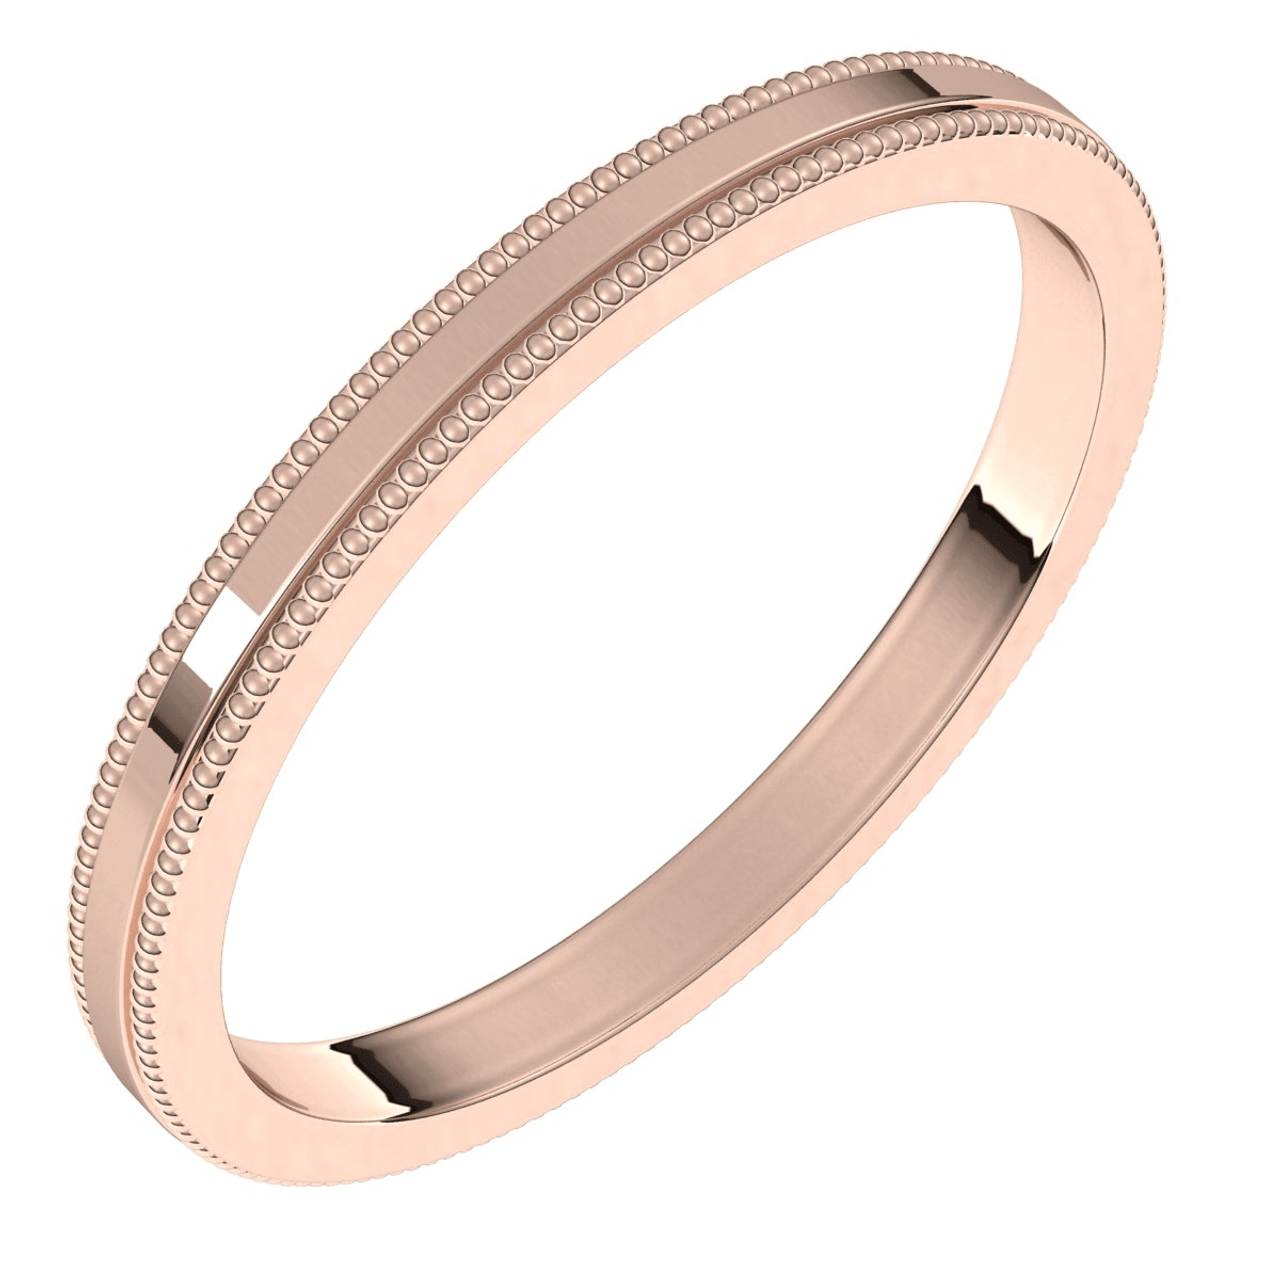 Edge Band in Yellow, Rose or White Gold